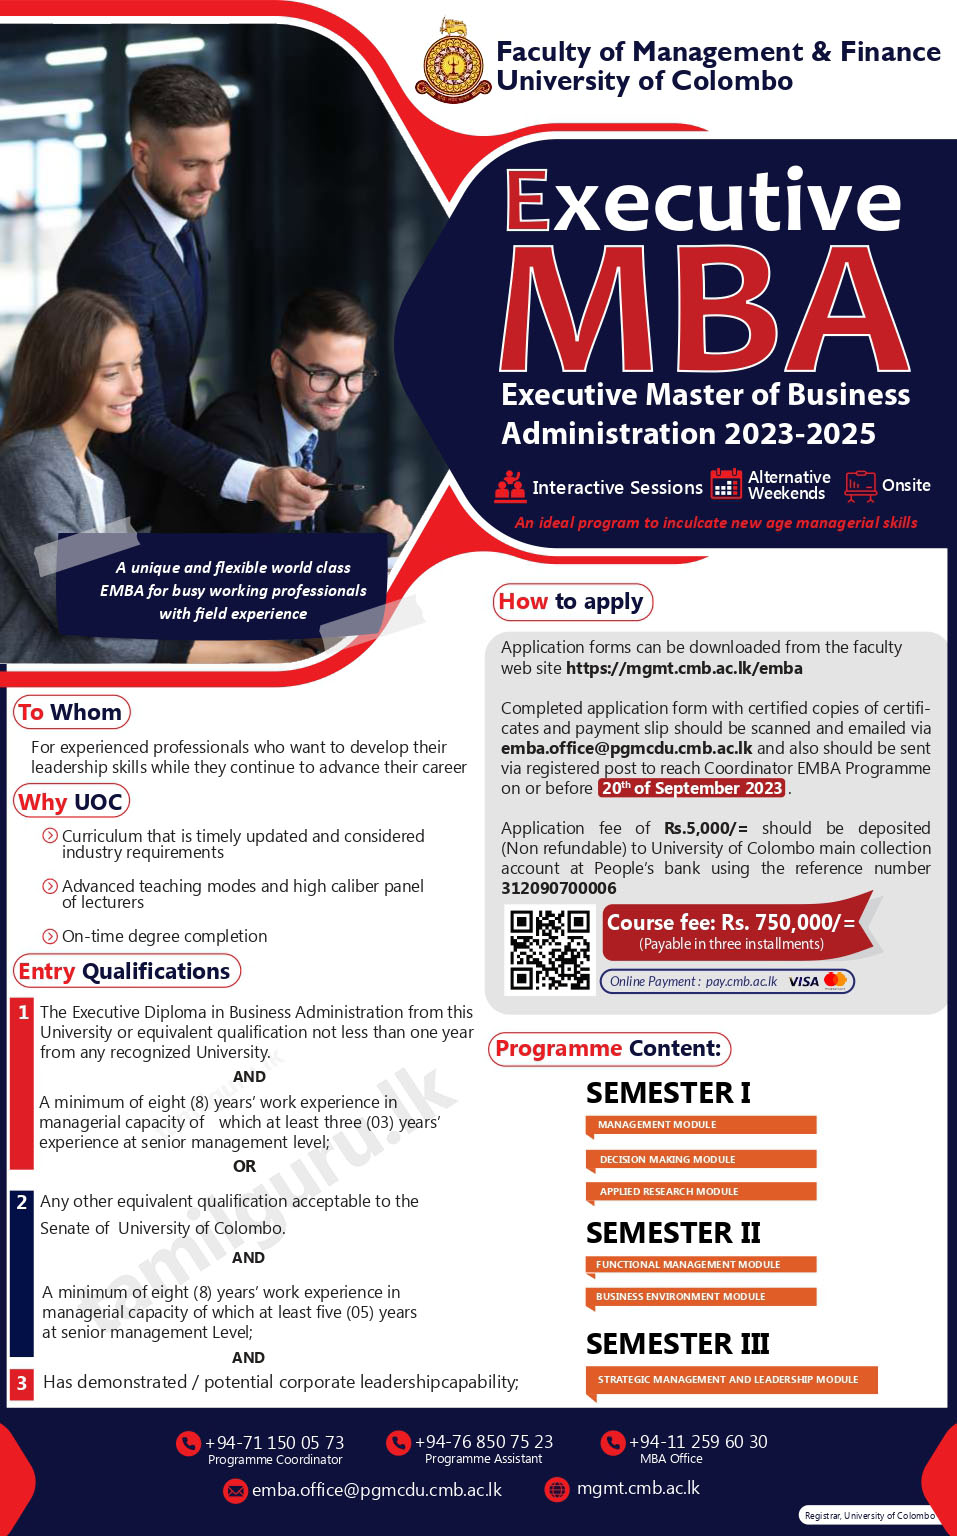 Executive Master of Business Administration (EMBA) 2023/25 - University of Colombo